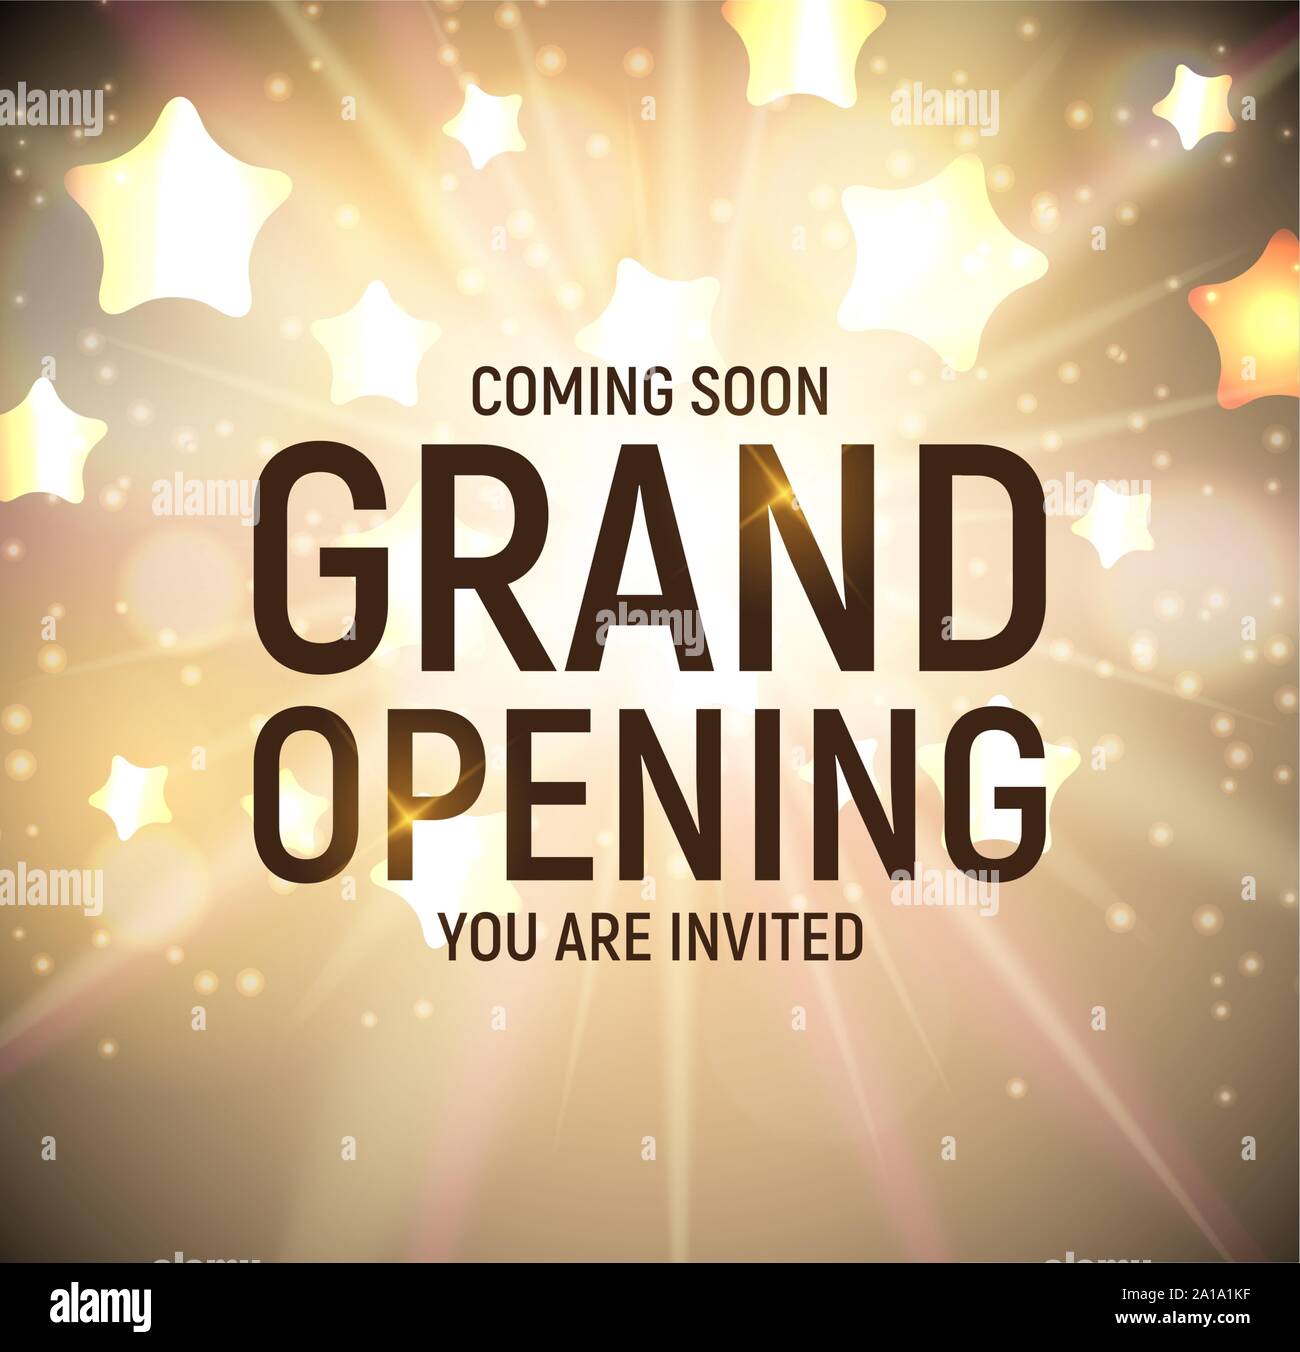 Grand Opening Concept Vector Illustration Stock Vector Image And Art Alamy